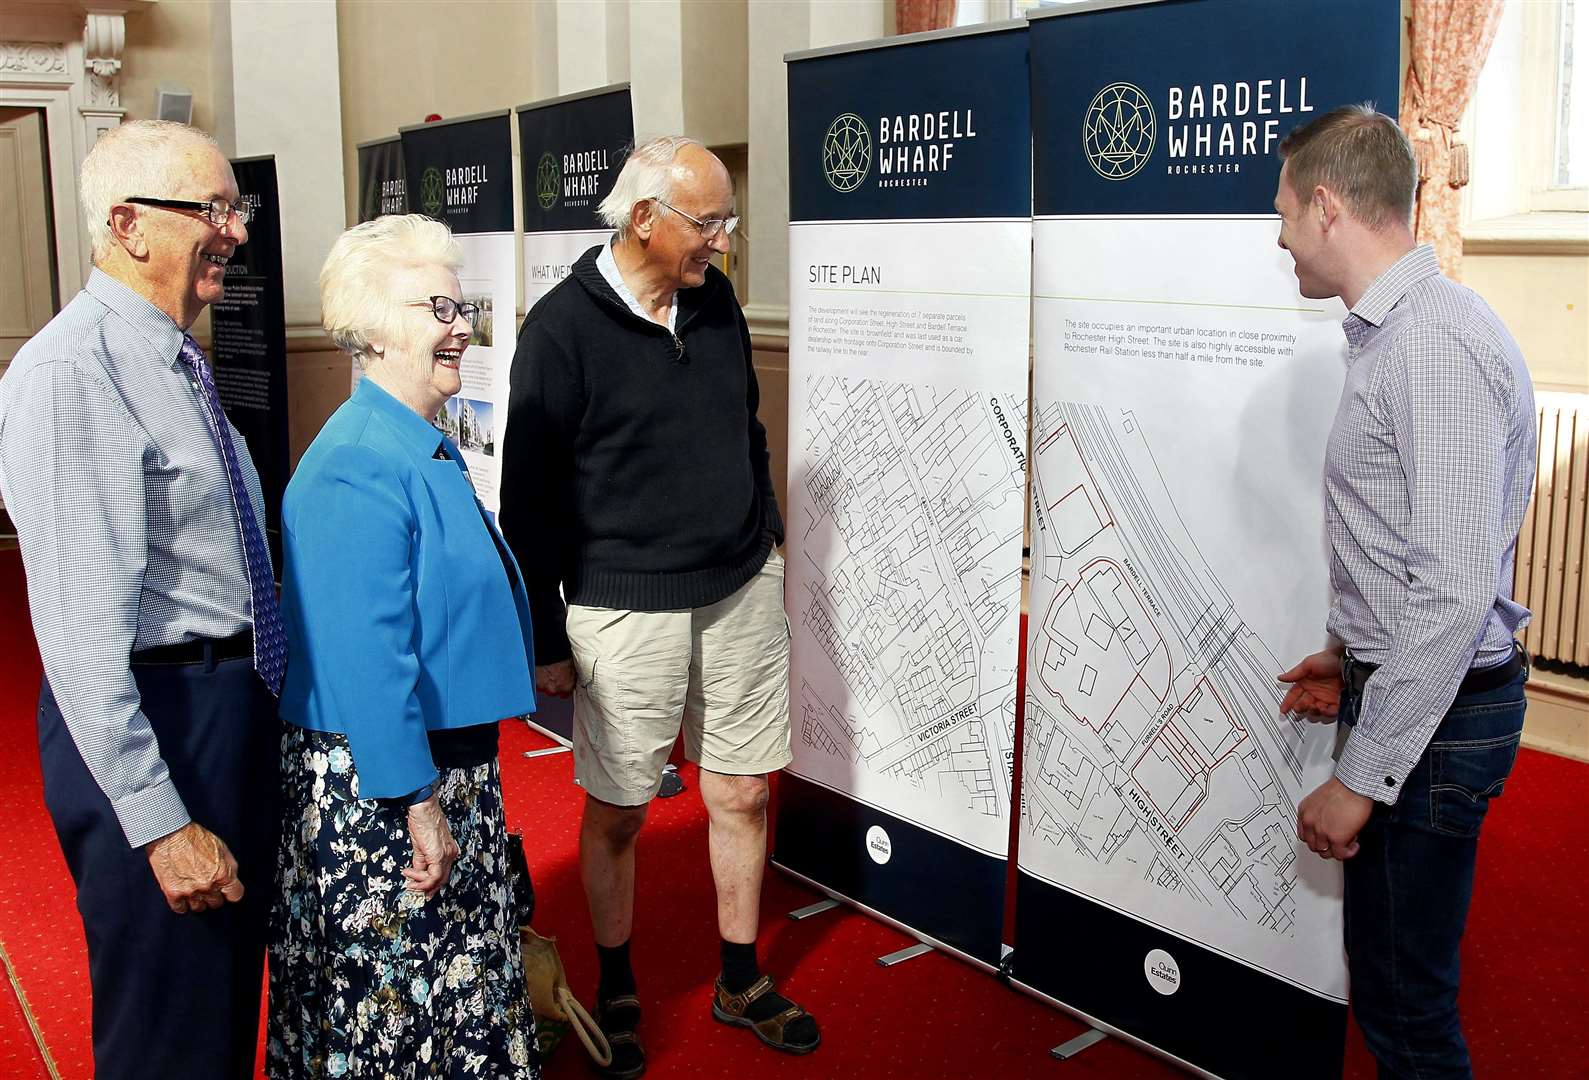 A consultation into the Bardell Wharf plans took place last year